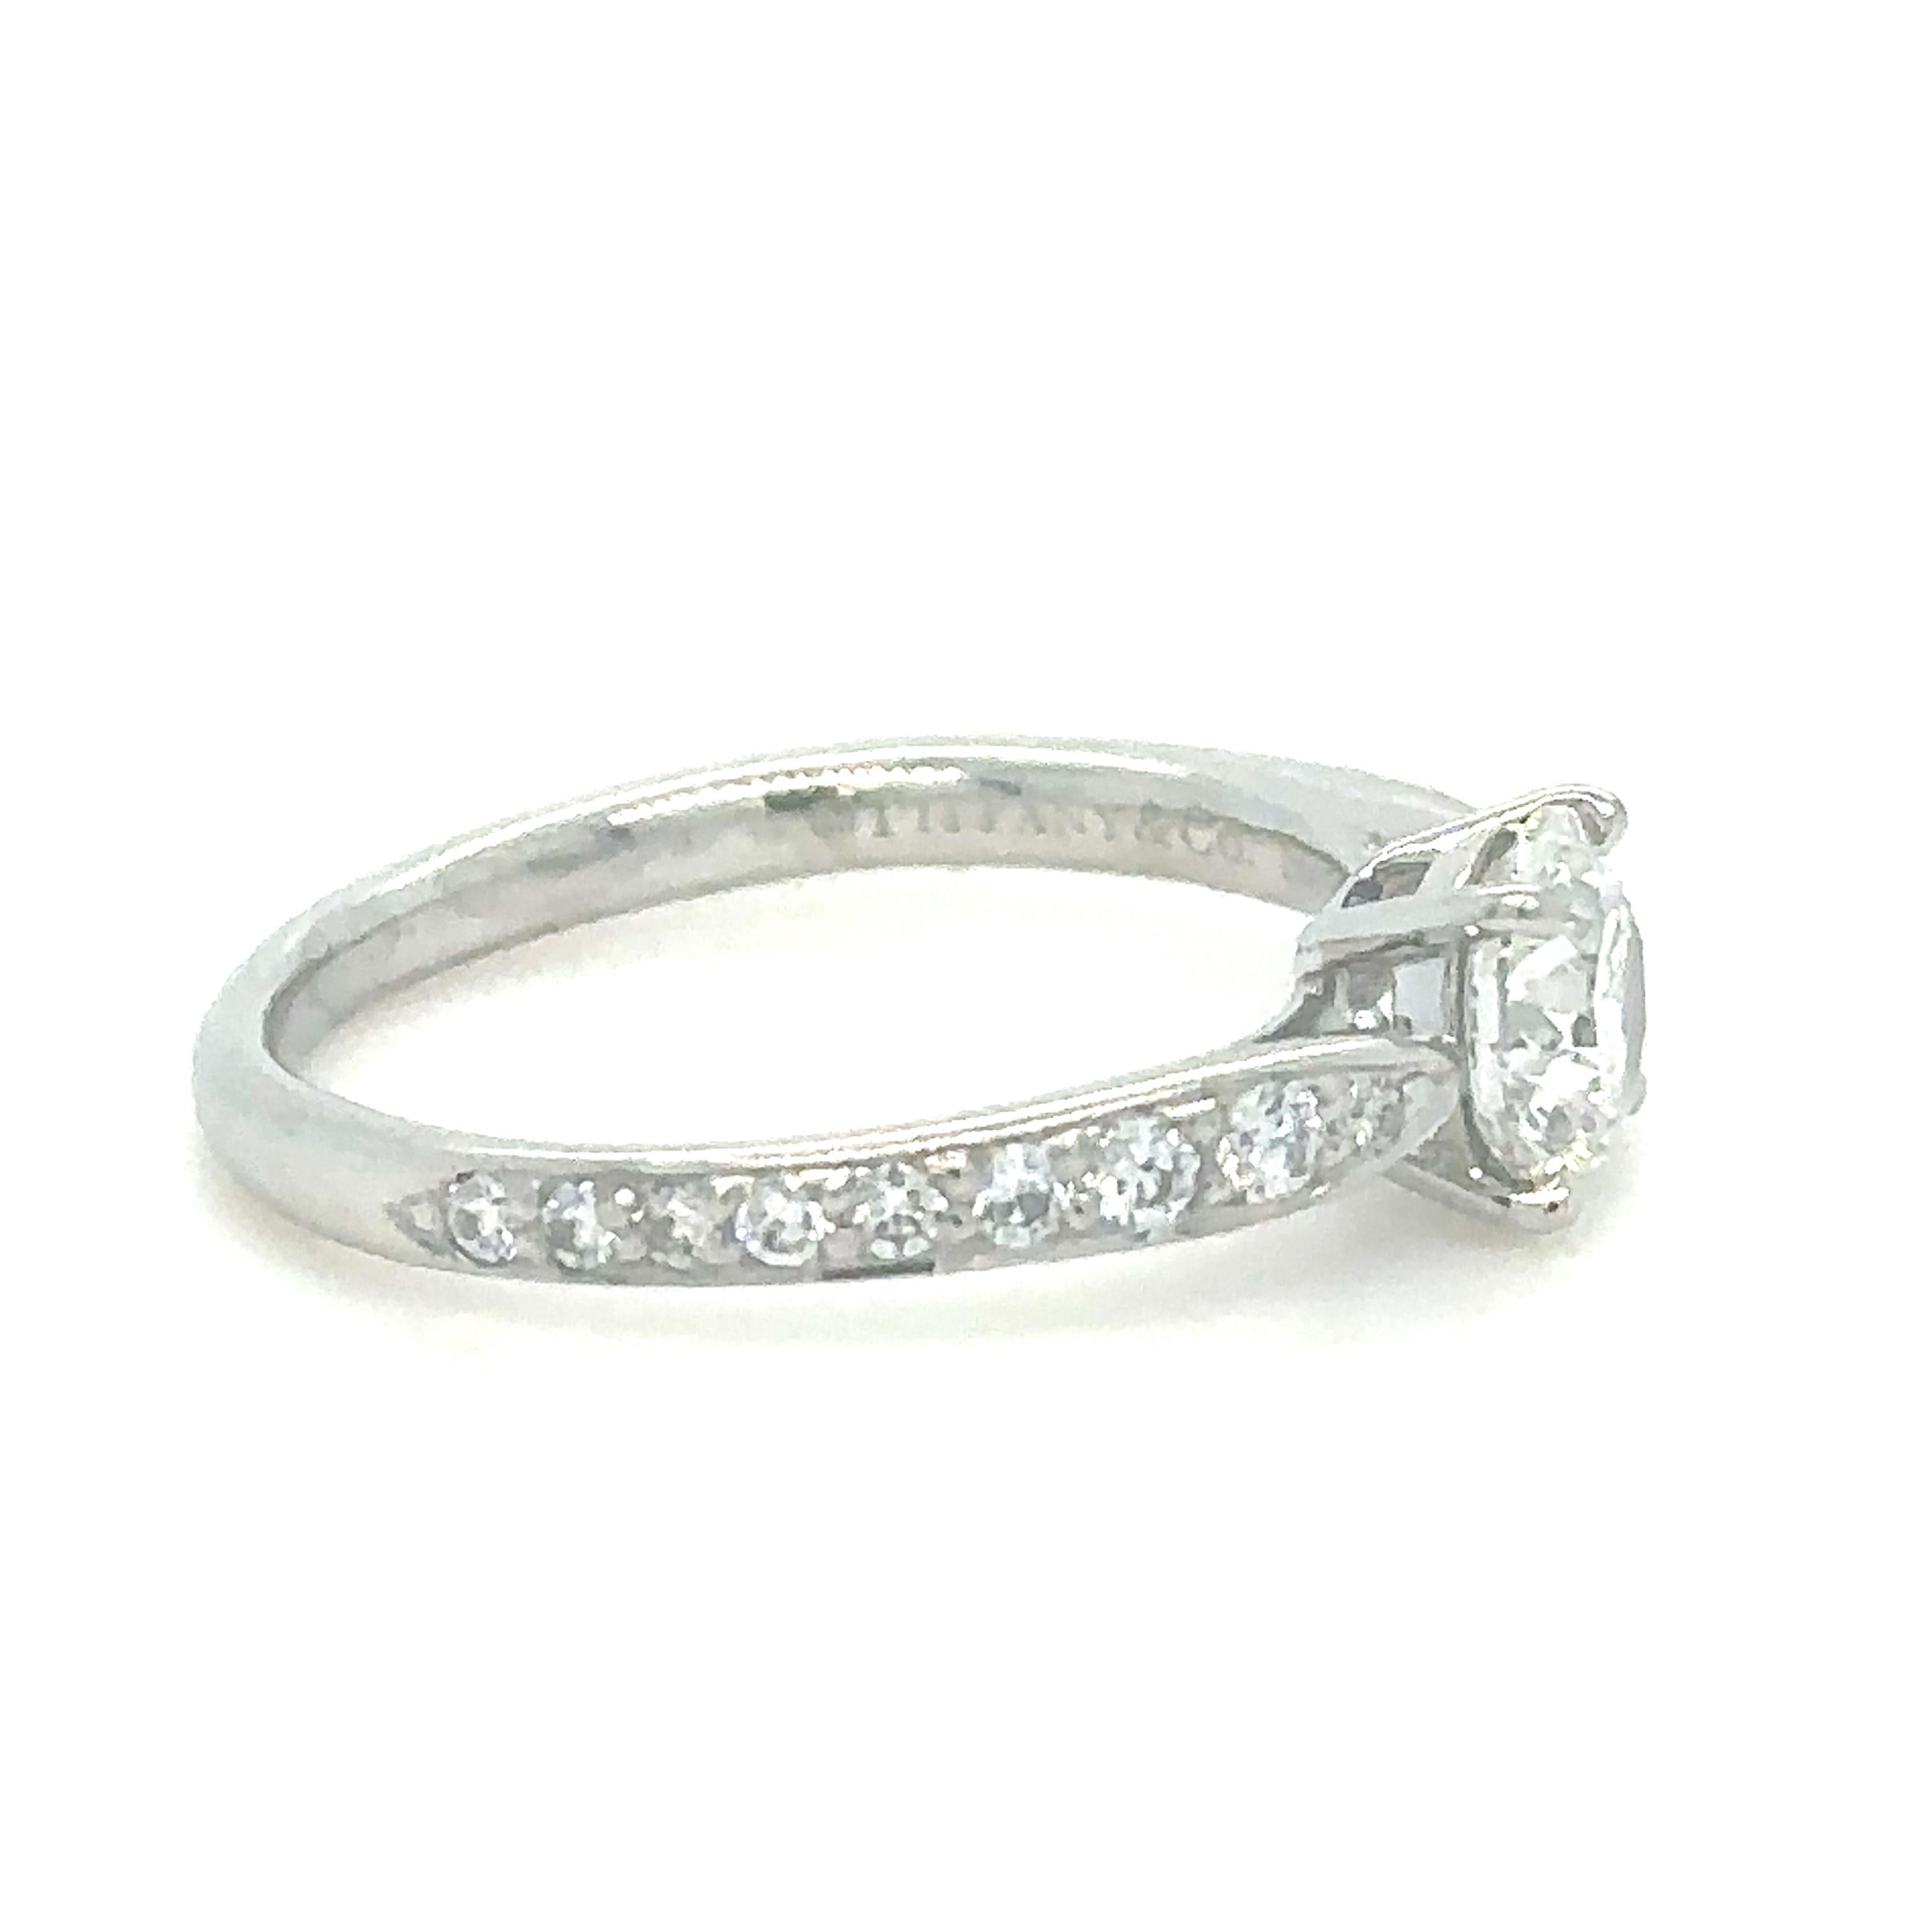 Unique features: 
Tiffany & Co Harmony Engagement Ring in Platinum 0.62ct

One Tiffany & Co platinum and diamond Tiffany Harmony Ring, set with one round brilliant cut diamond weighing .62ct, G colour, VVS1 clarity, bead set on the shank with round